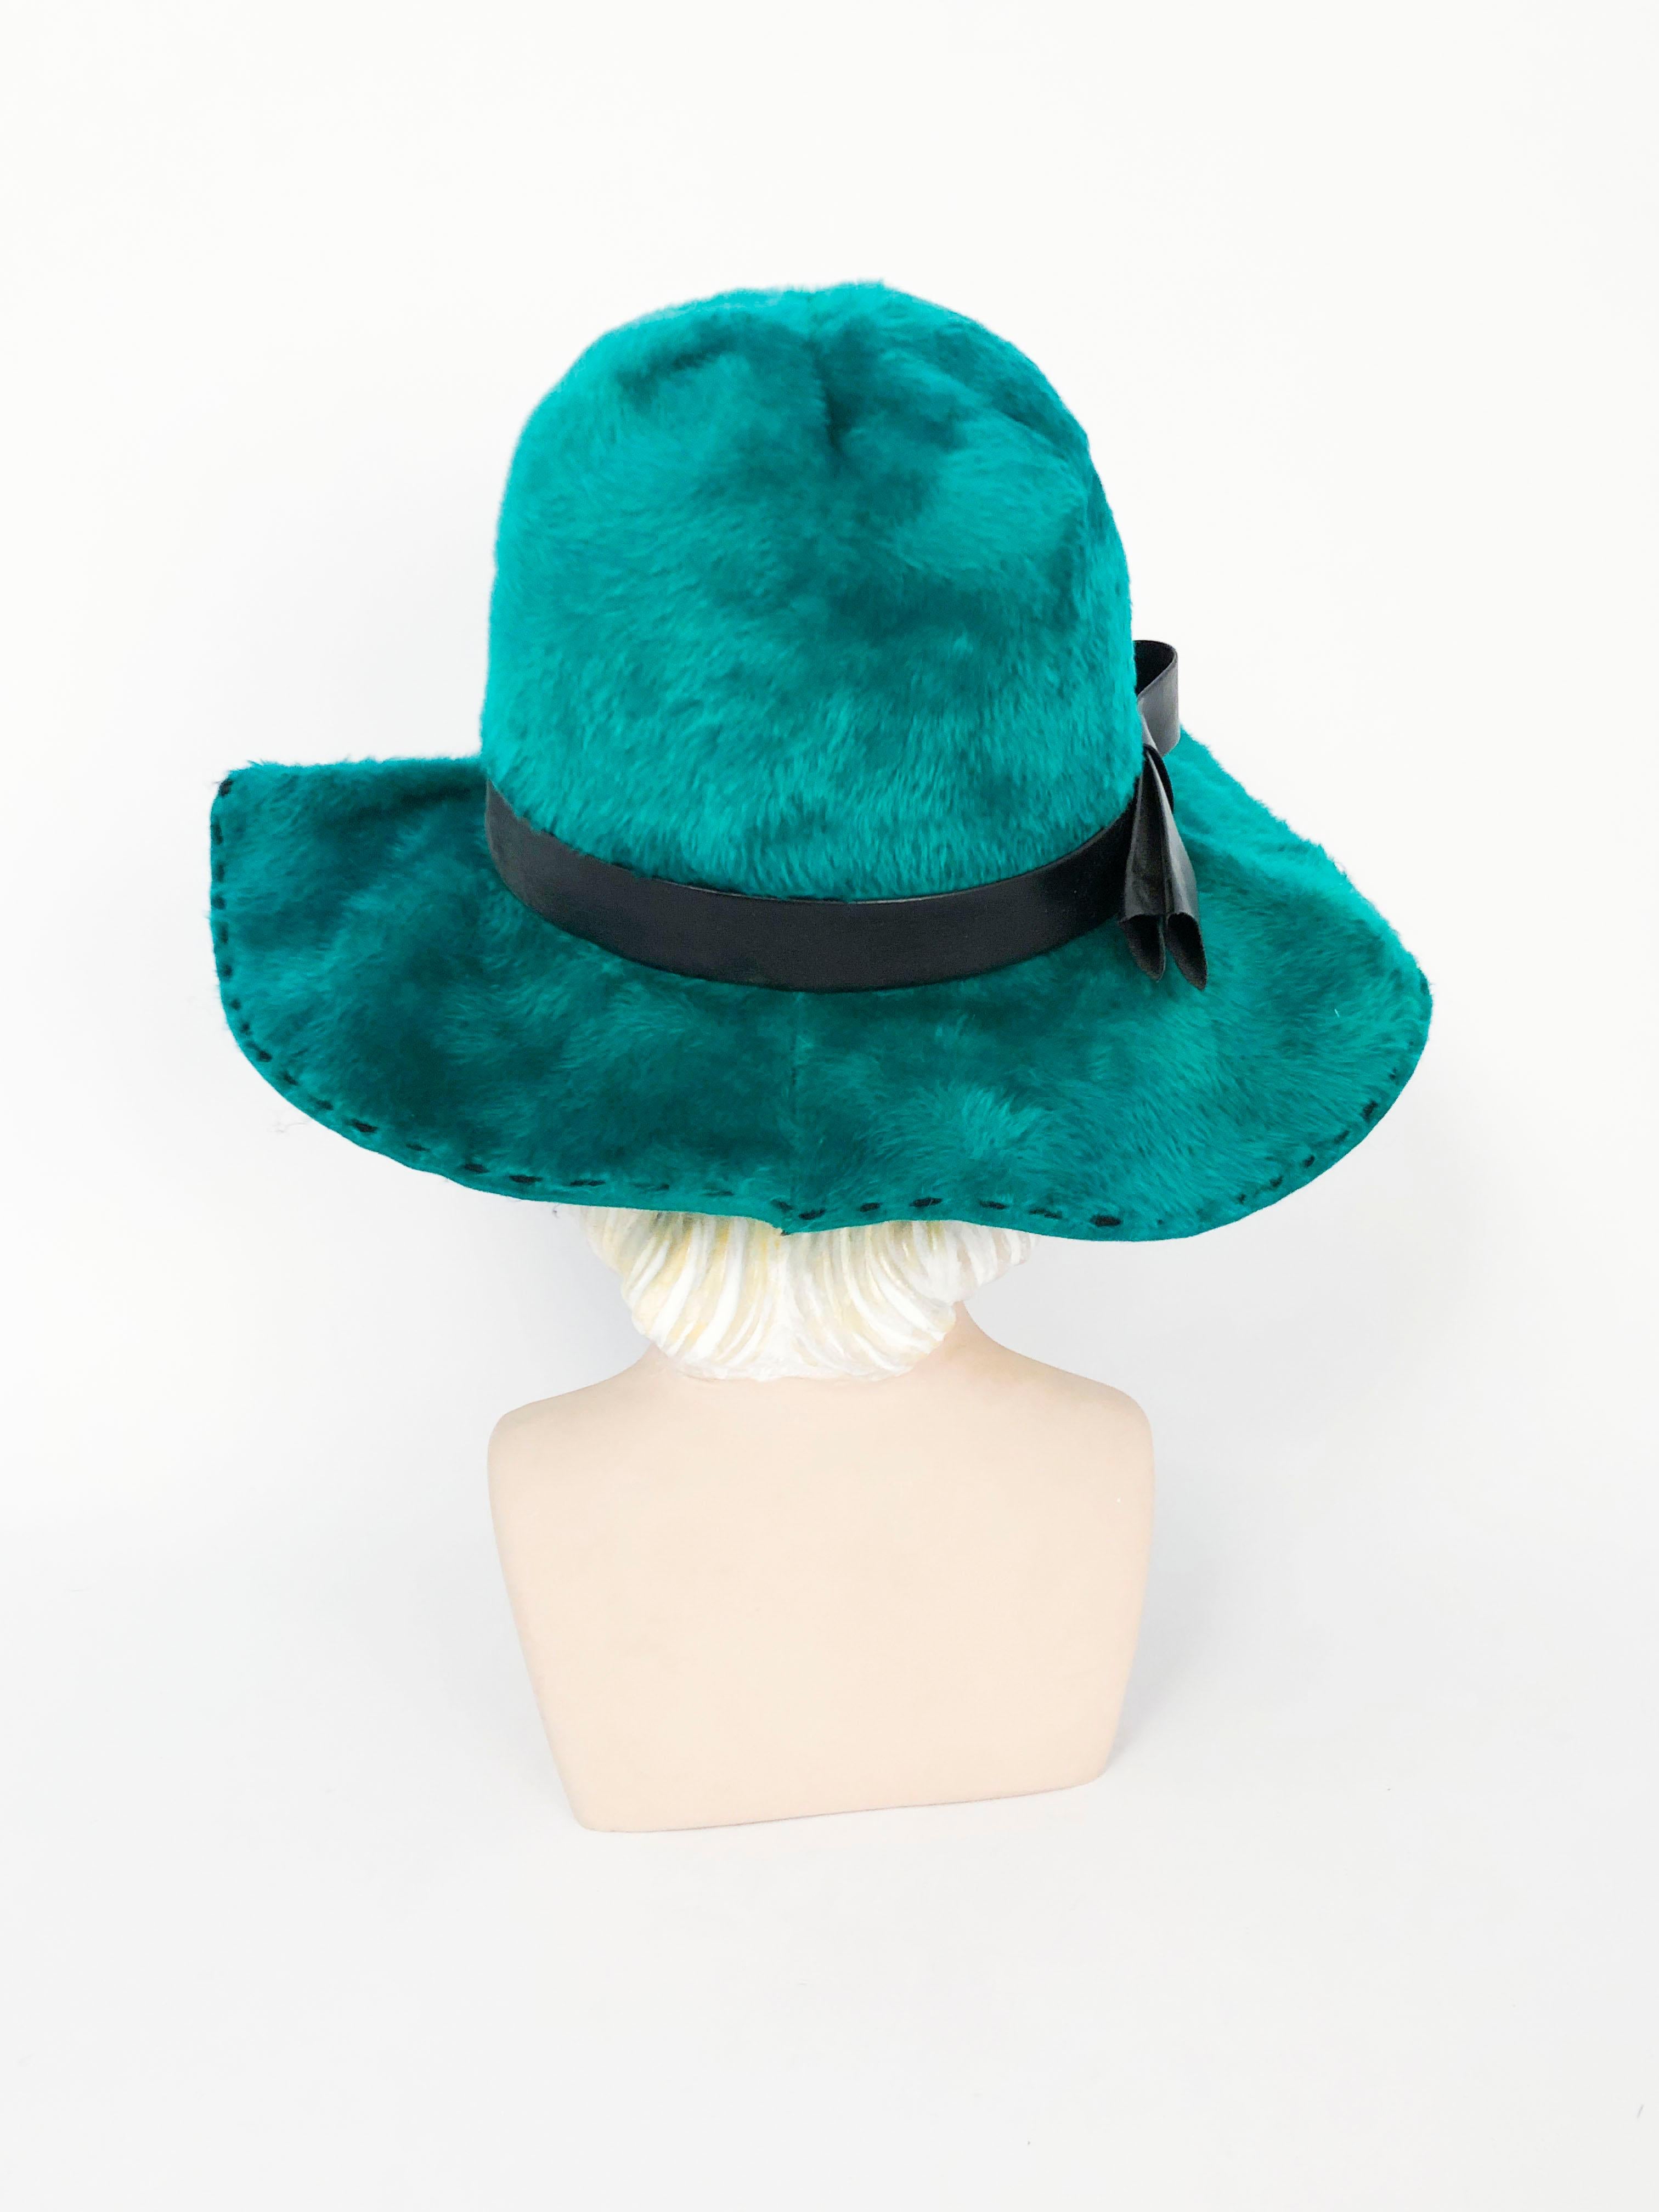 Women's 1970s Deborah Teal/Green rabbit Hat with Black Topstitch and Faux Leather Band For Sale